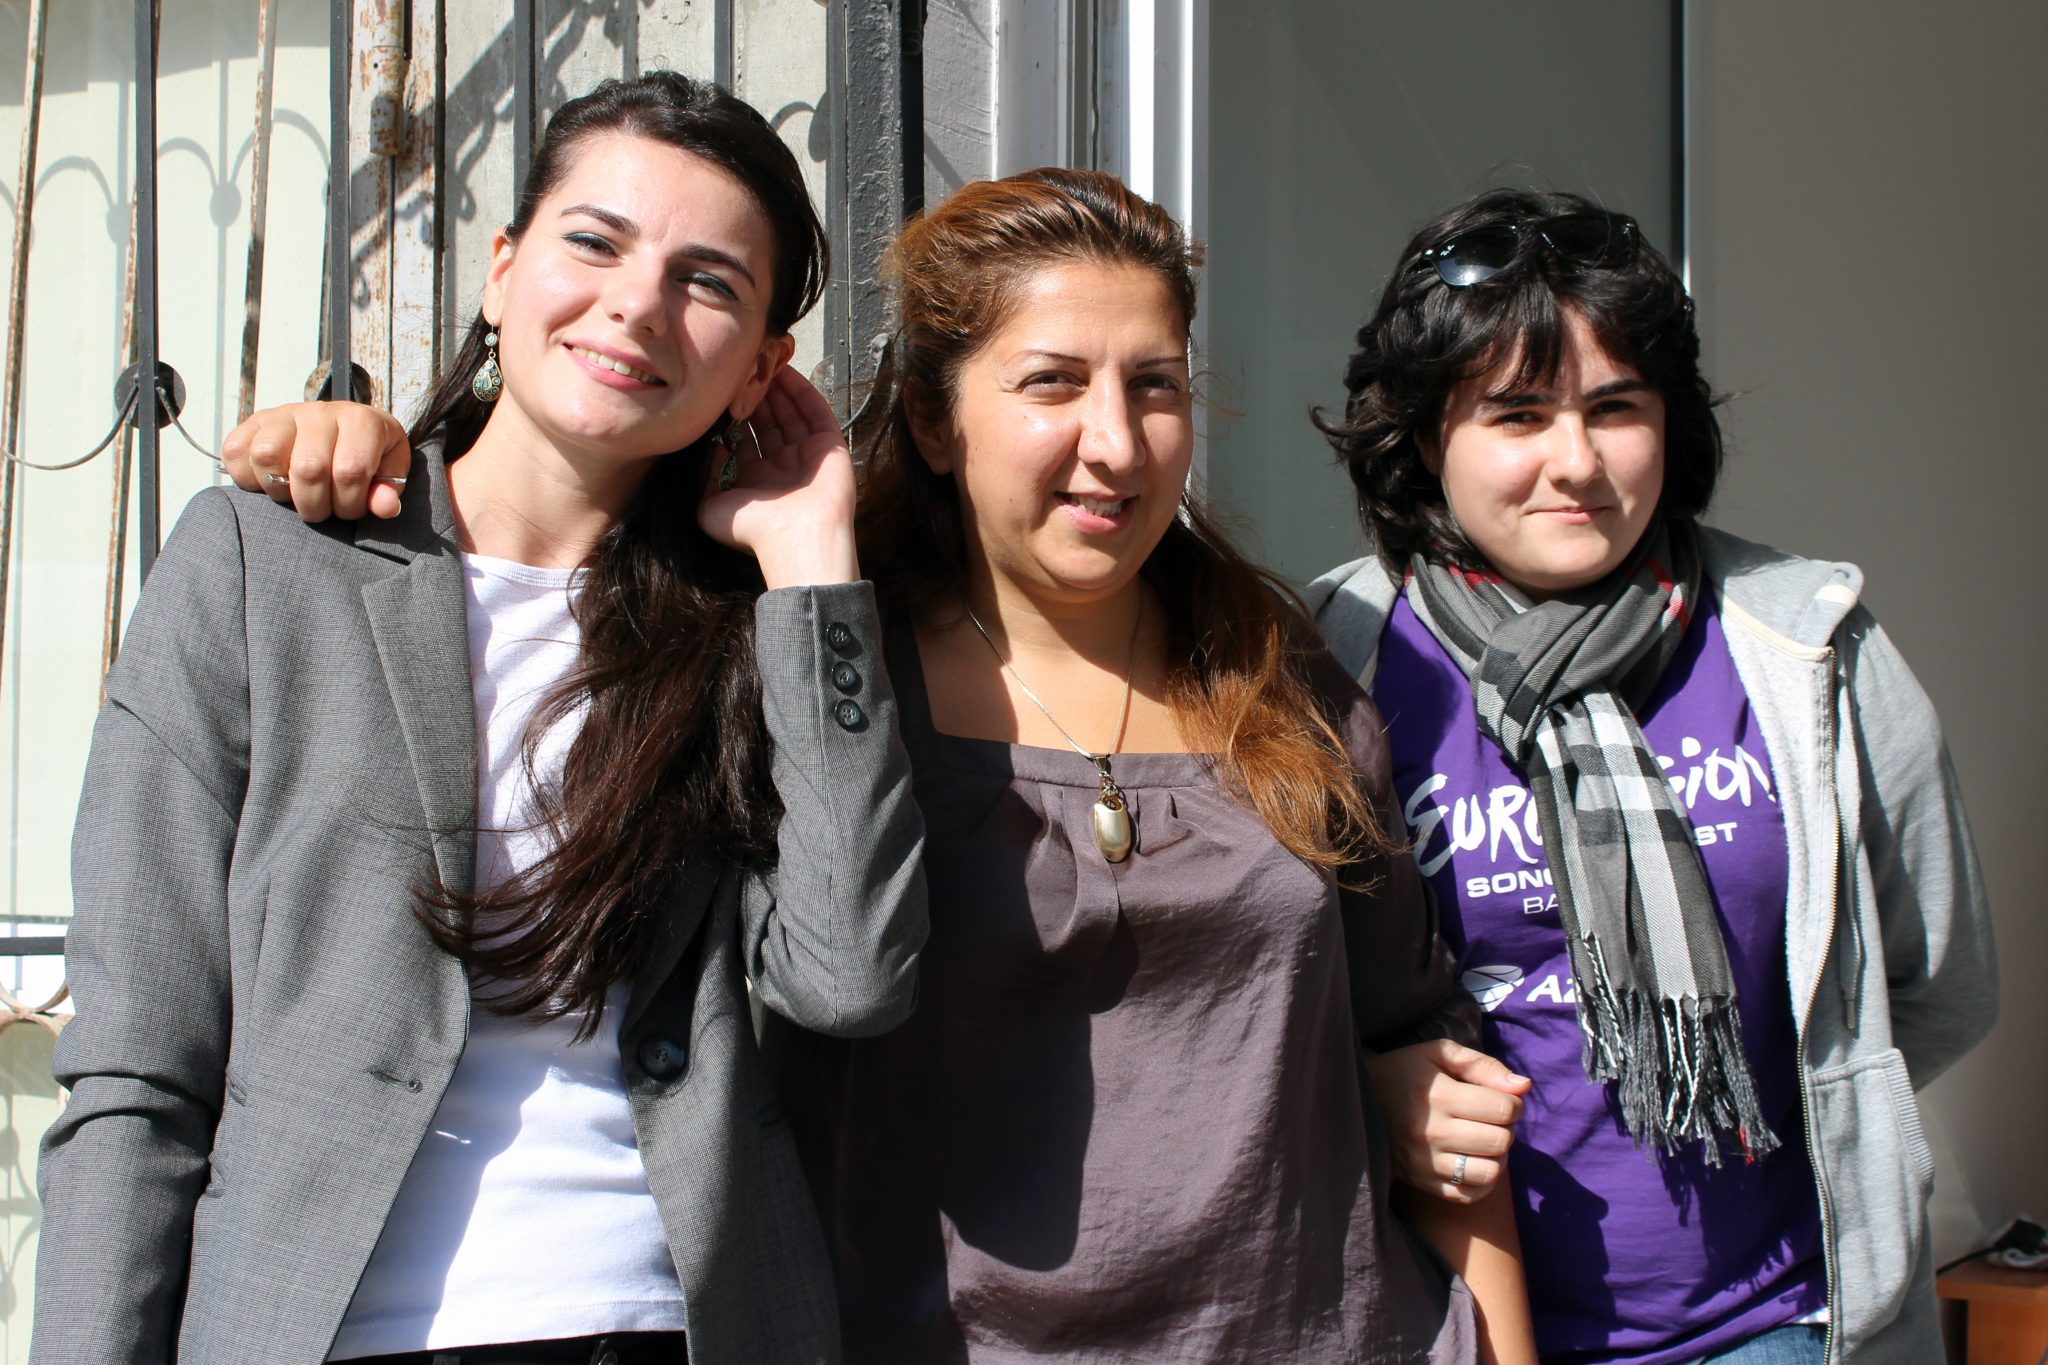 Women activists from Azerbaijan who encourage young women to stand up for a peaceful settlement of the Nagorno-Karabakh conflict. Photo: Karin Råghall / Kvinna till Kvinna